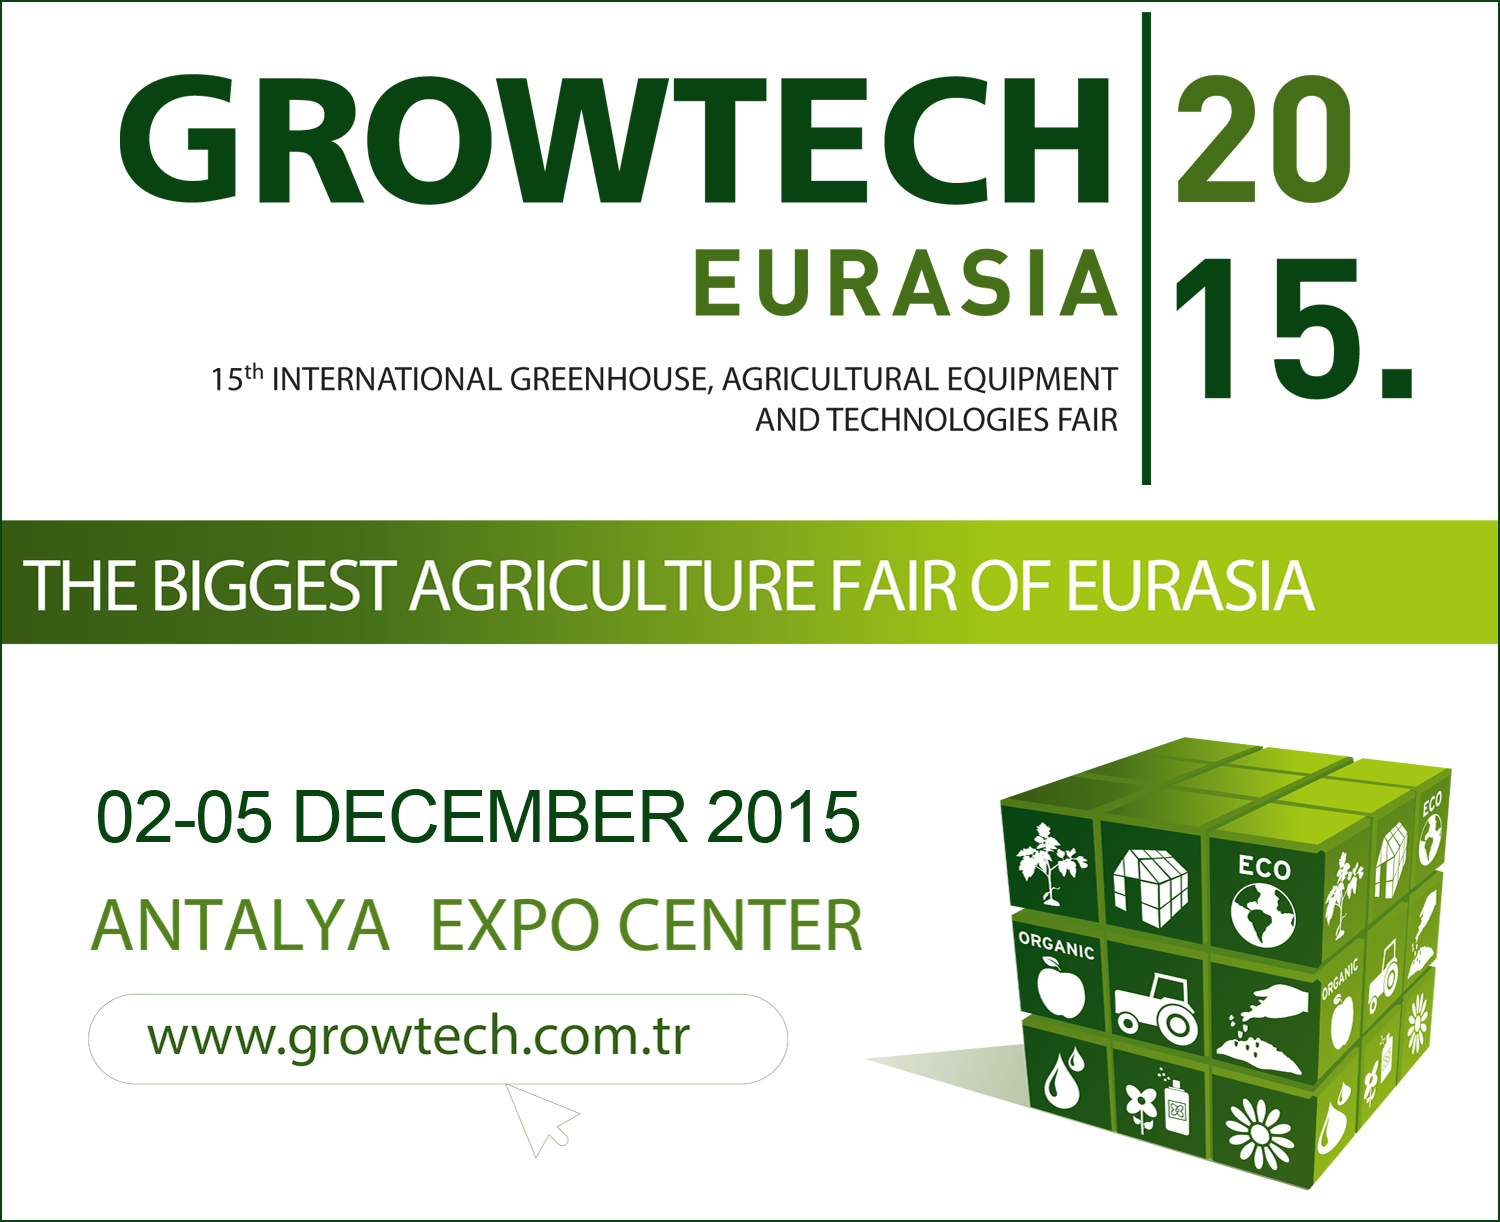 Growtech Eurasia 2015, which celebrates its 15th anniversary this year, brings together agricultural professionals from a wide area – extending from European and Balkan countries to the Middle East and from North Africa to the Turkic Republics at the Antalya Expo Center –  over four days, from December 2-5, 2015